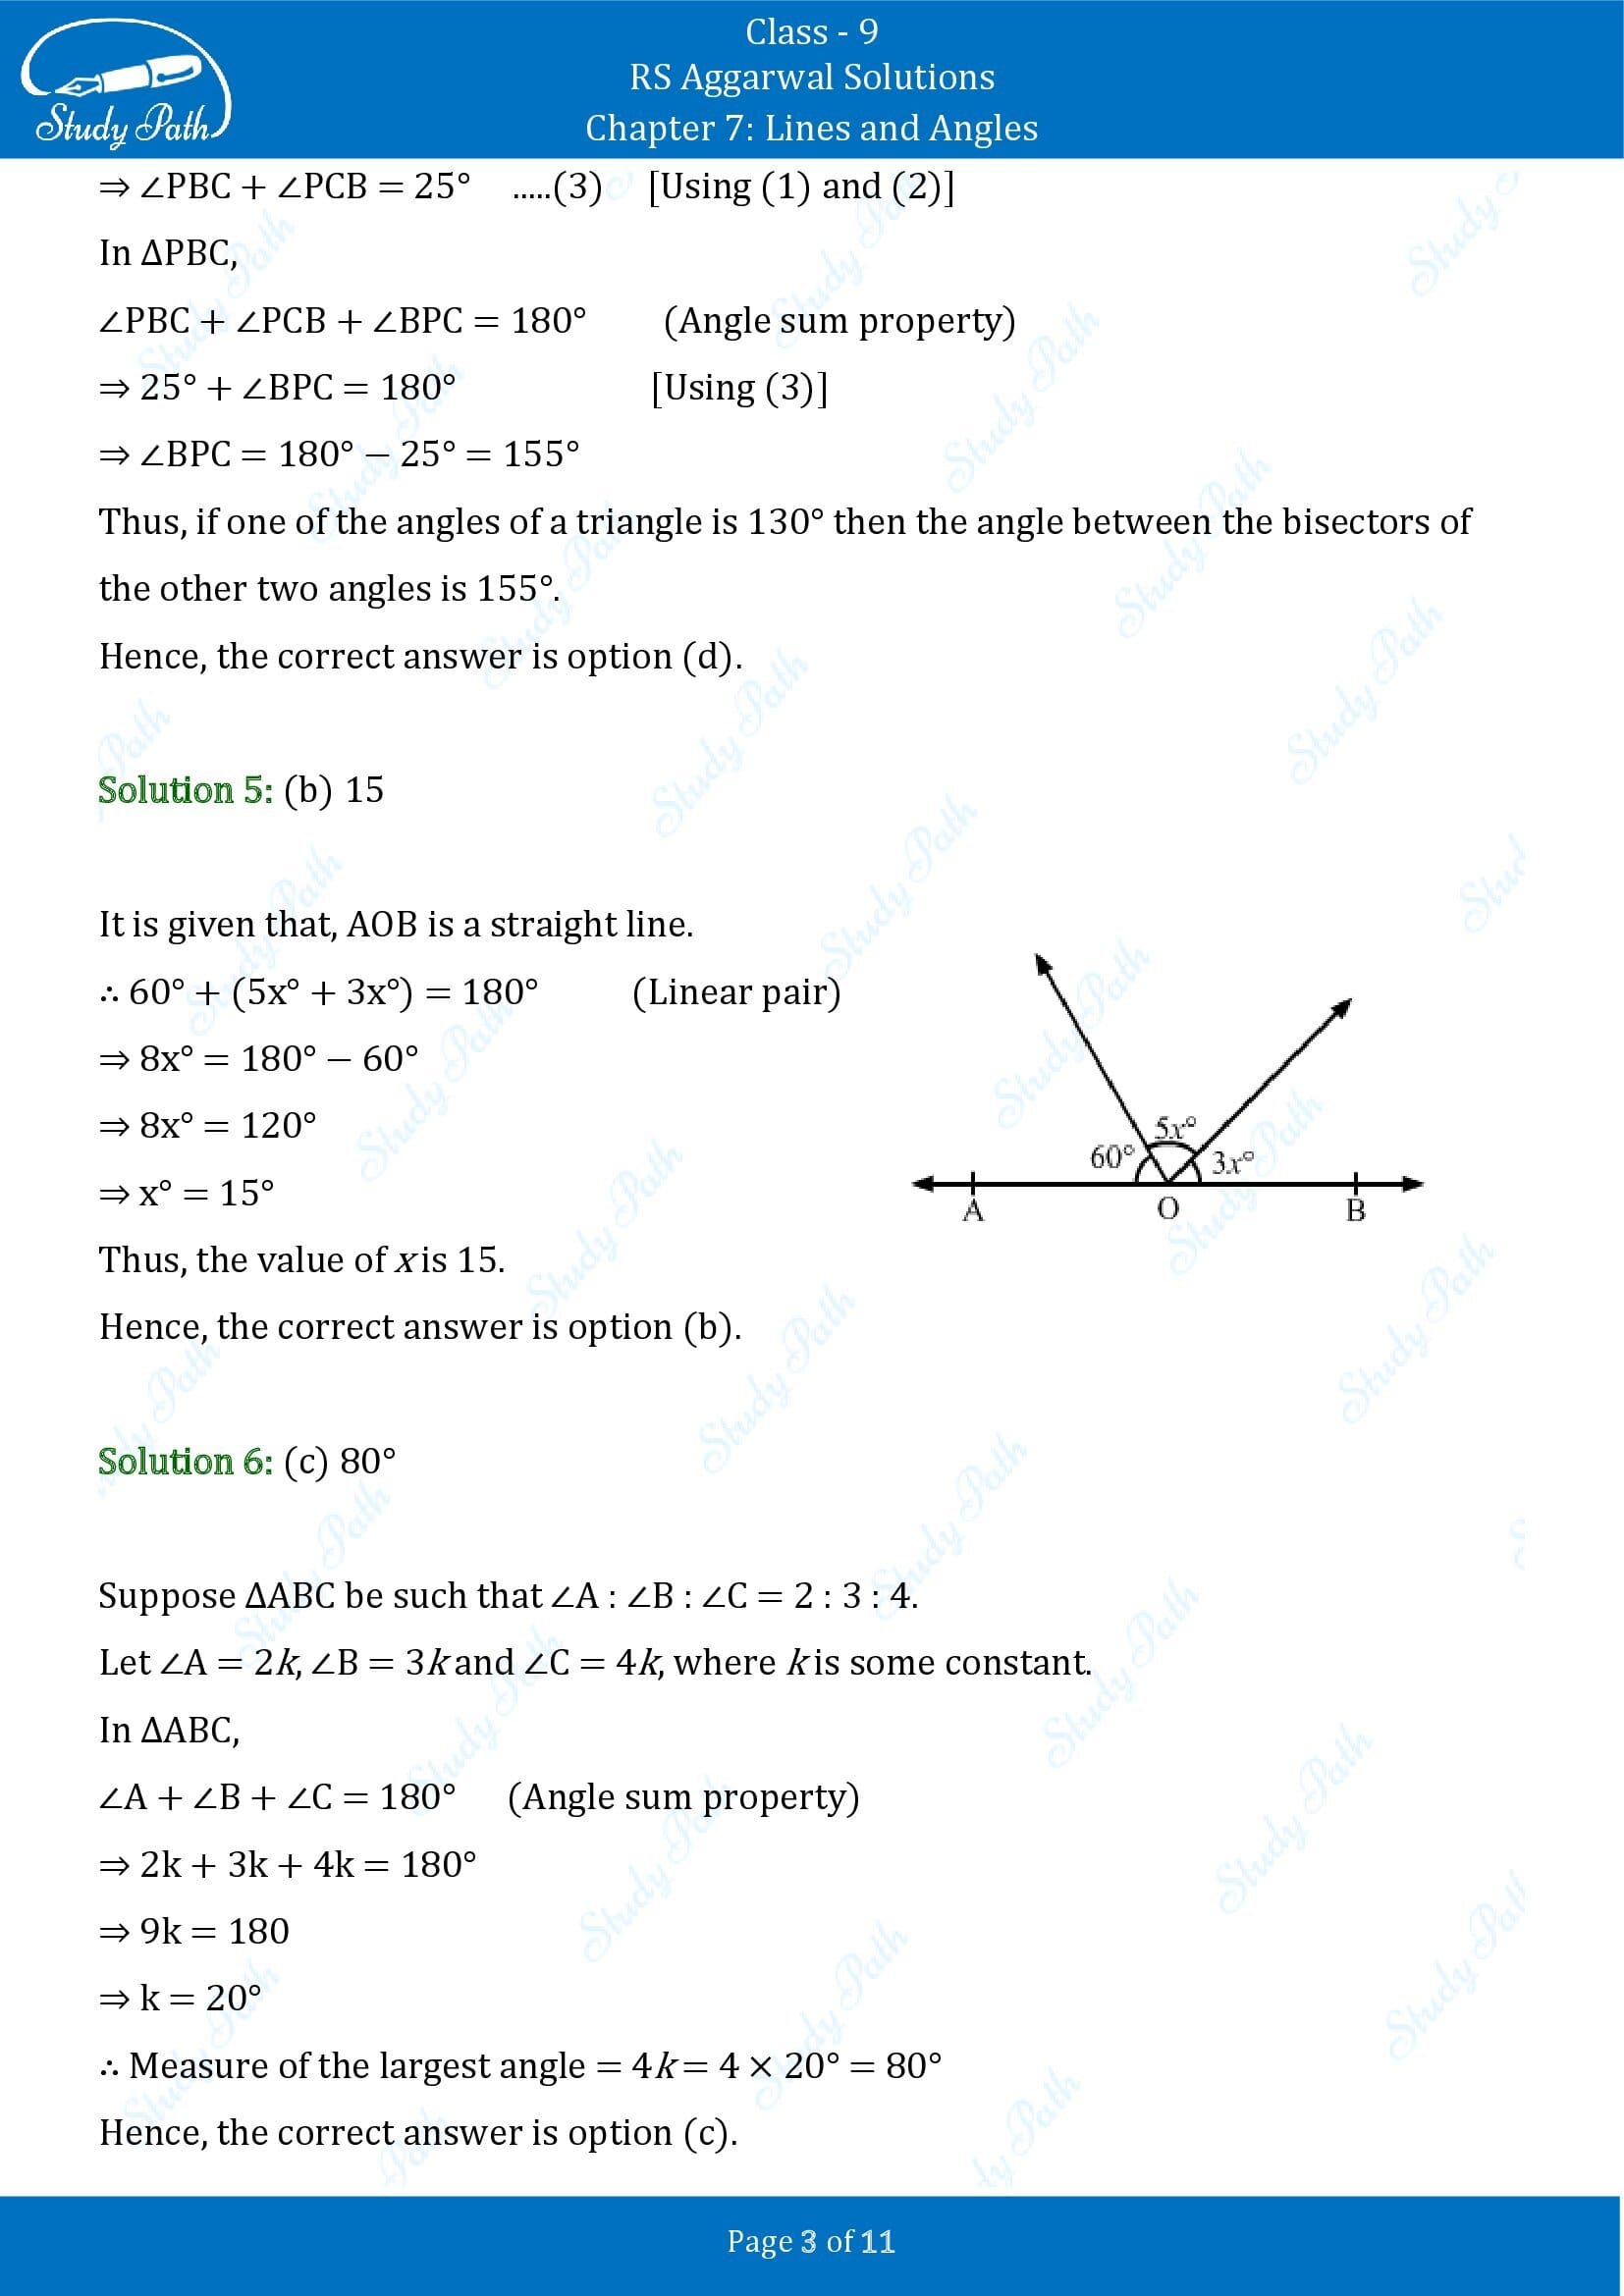 RS Aggarwal Solutions Class 9 Chapter 7 Lines and Angles Multiple Choice Questions MCQs 00003